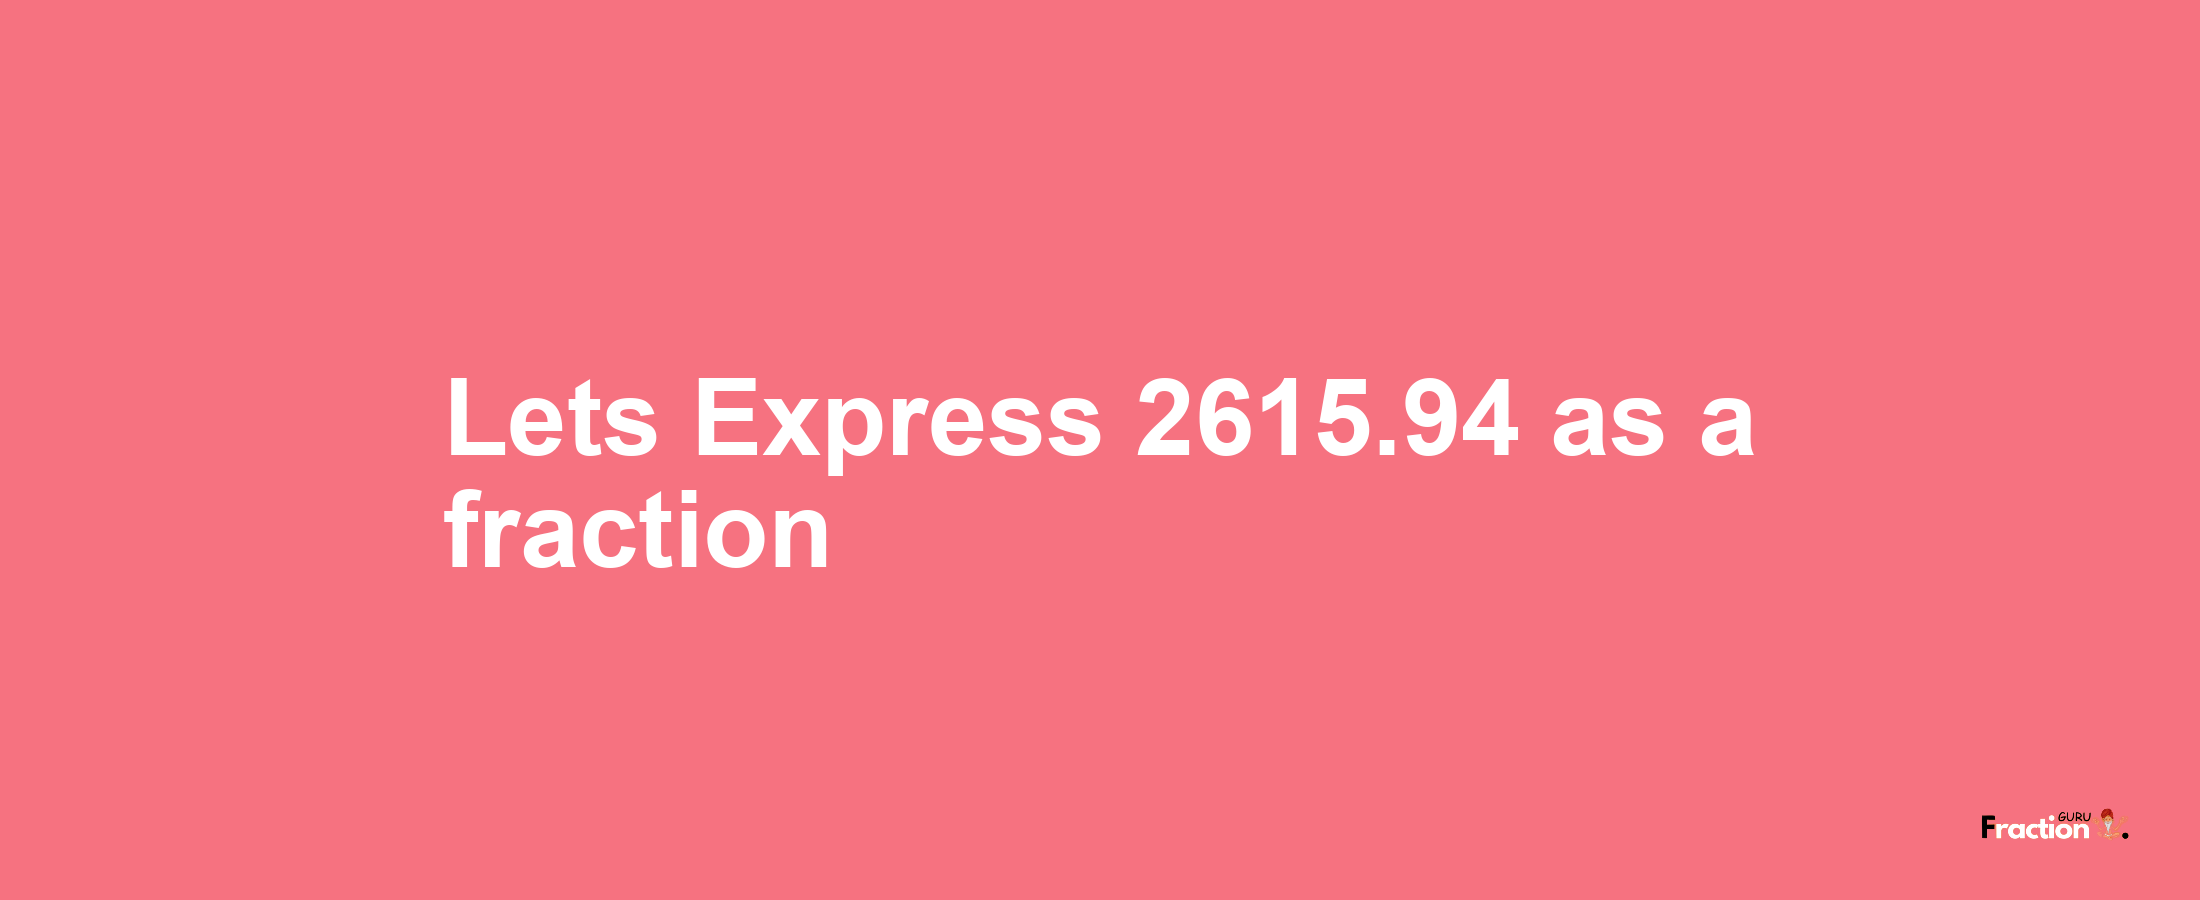 Lets Express 2615.94 as afraction